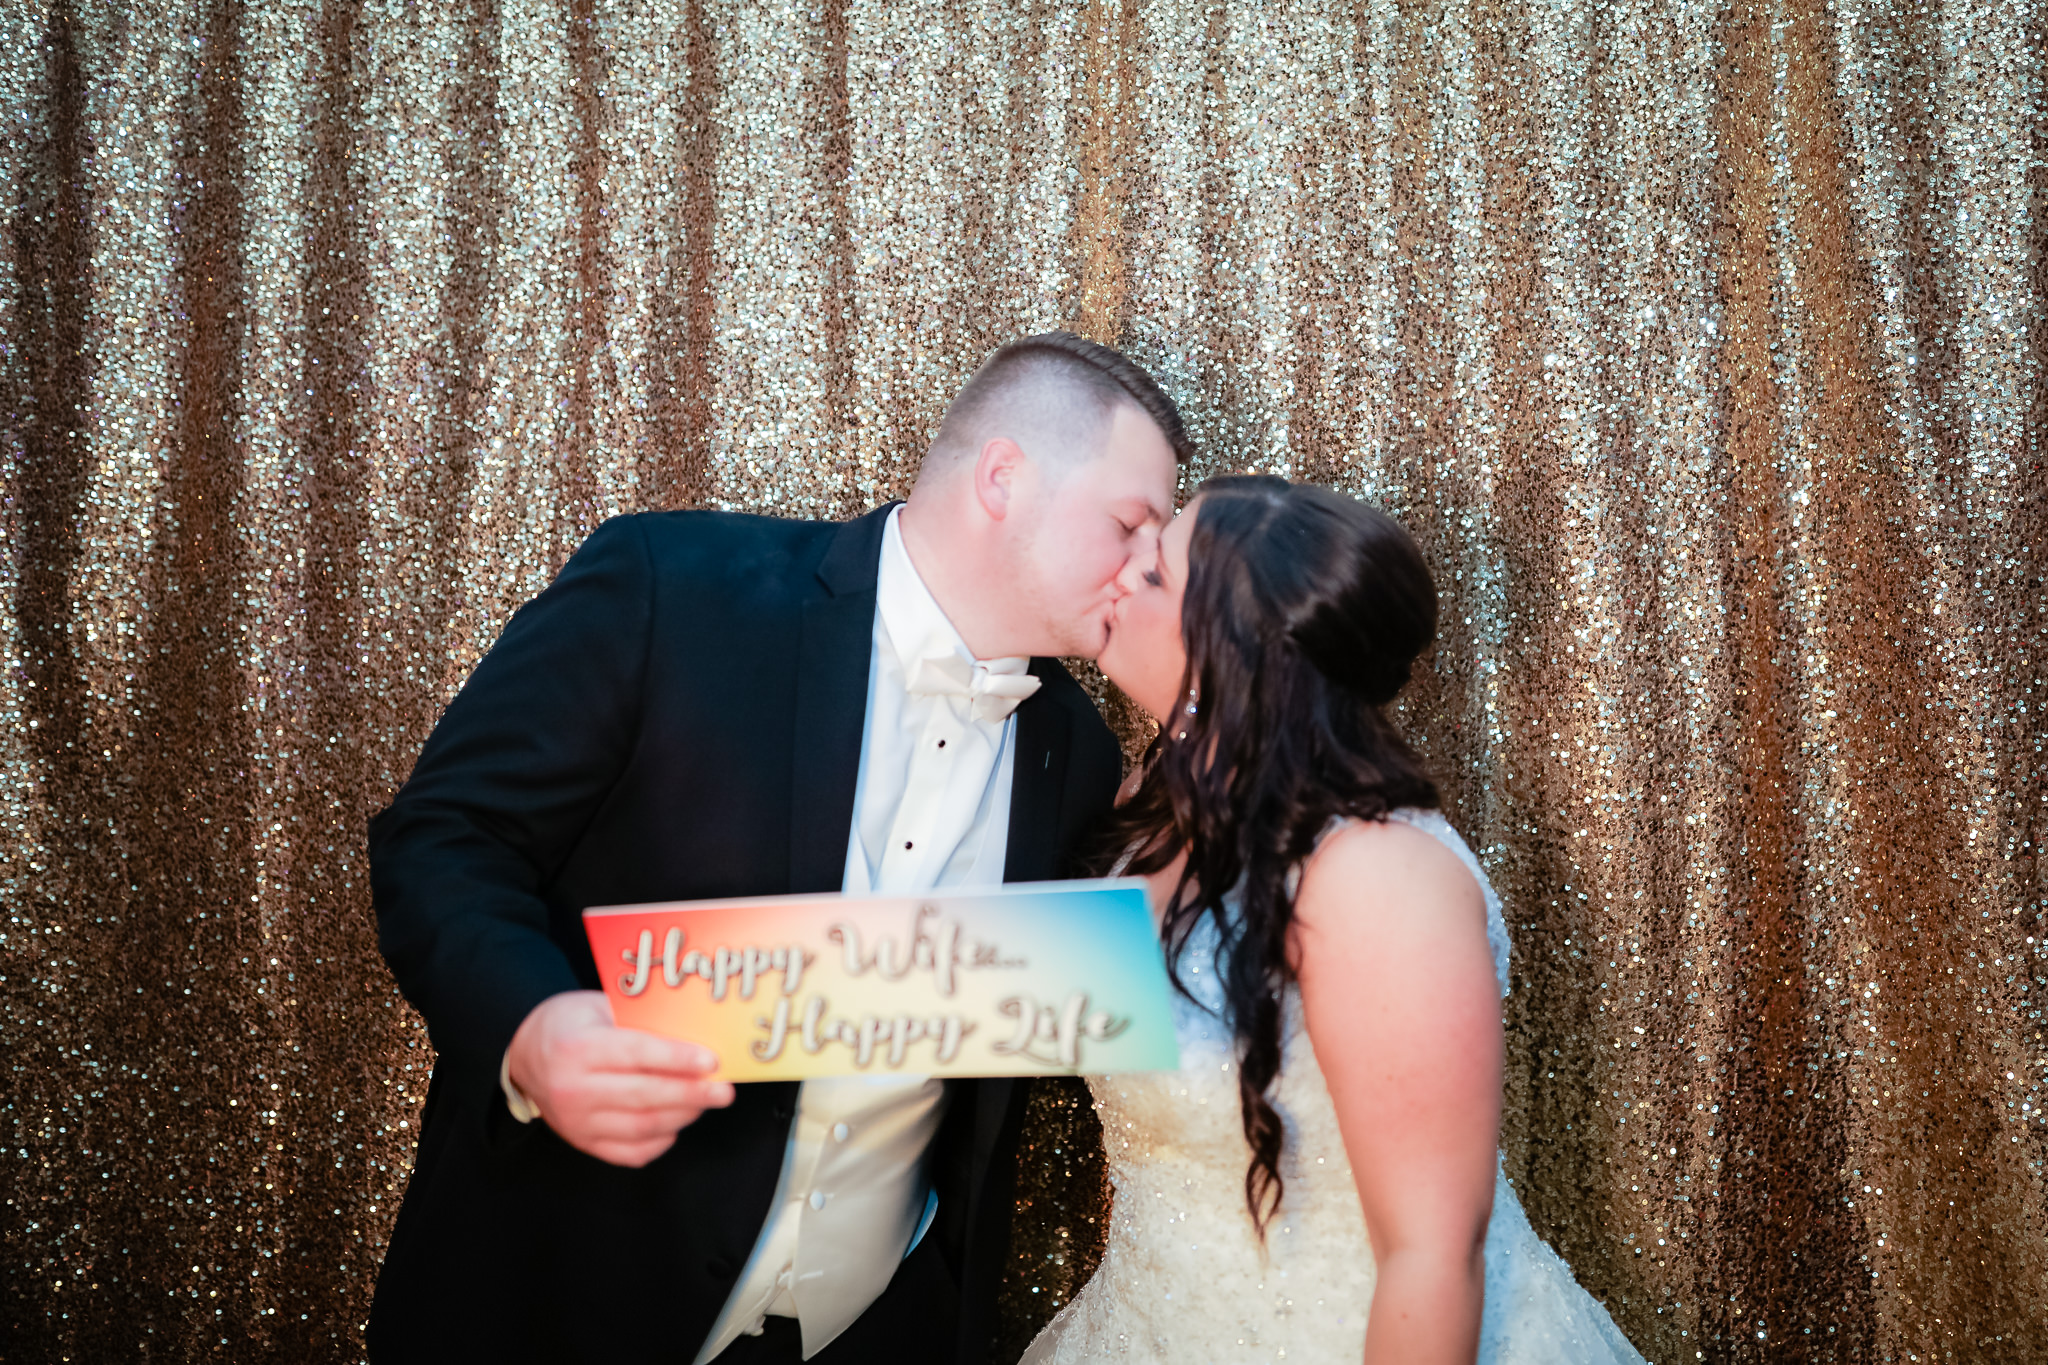 Bride and groom kiss inside the photo booth at their wedding at the Fez